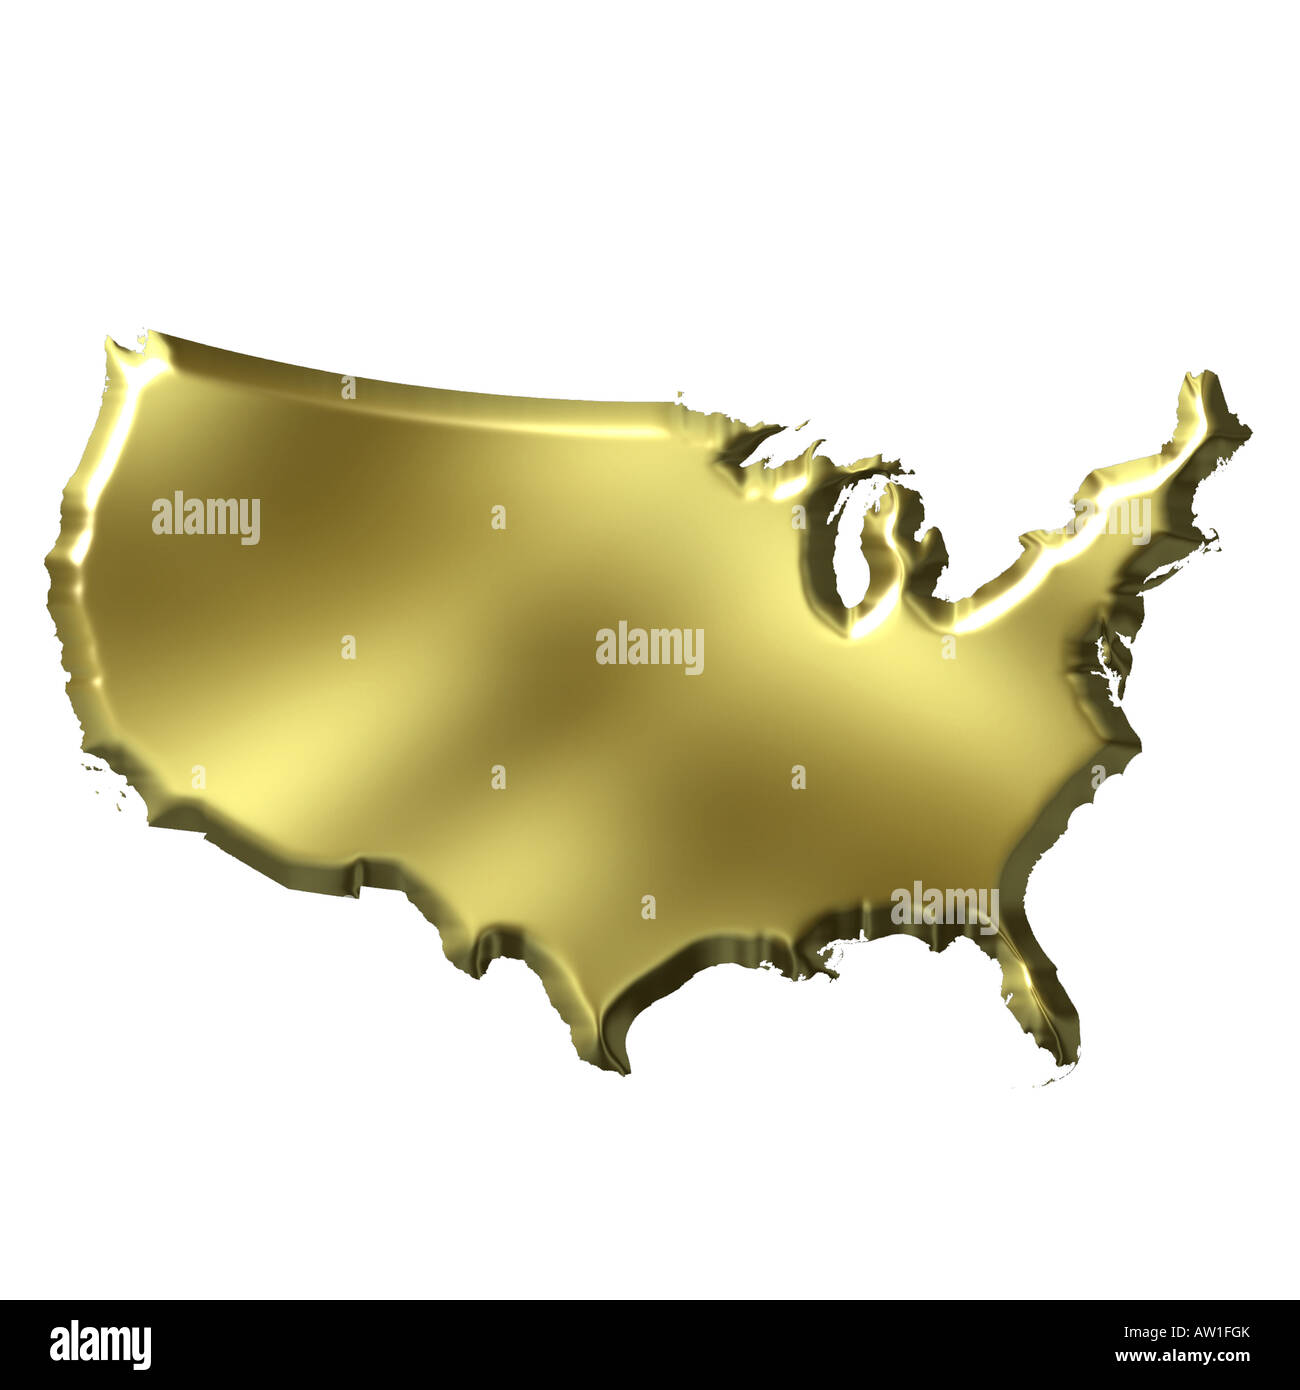 3d golden map of the united states of america Stock Photo